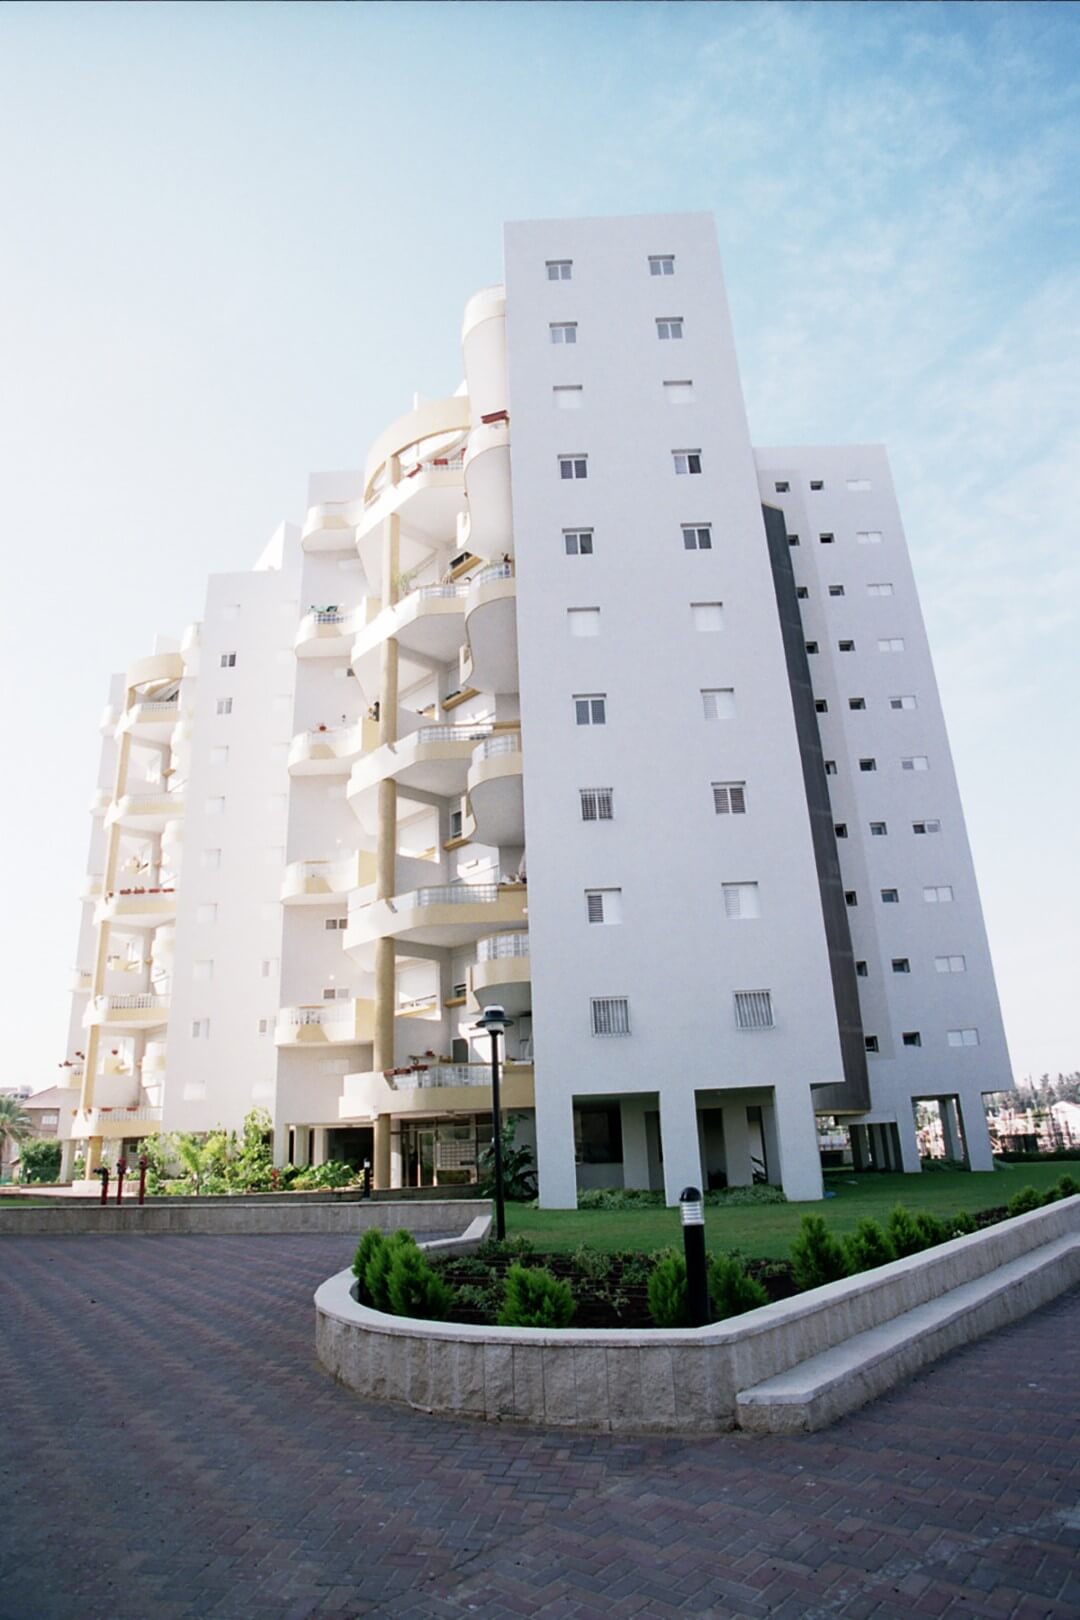 Photograph of a building from the Shikam Park project in Rishon Lezion